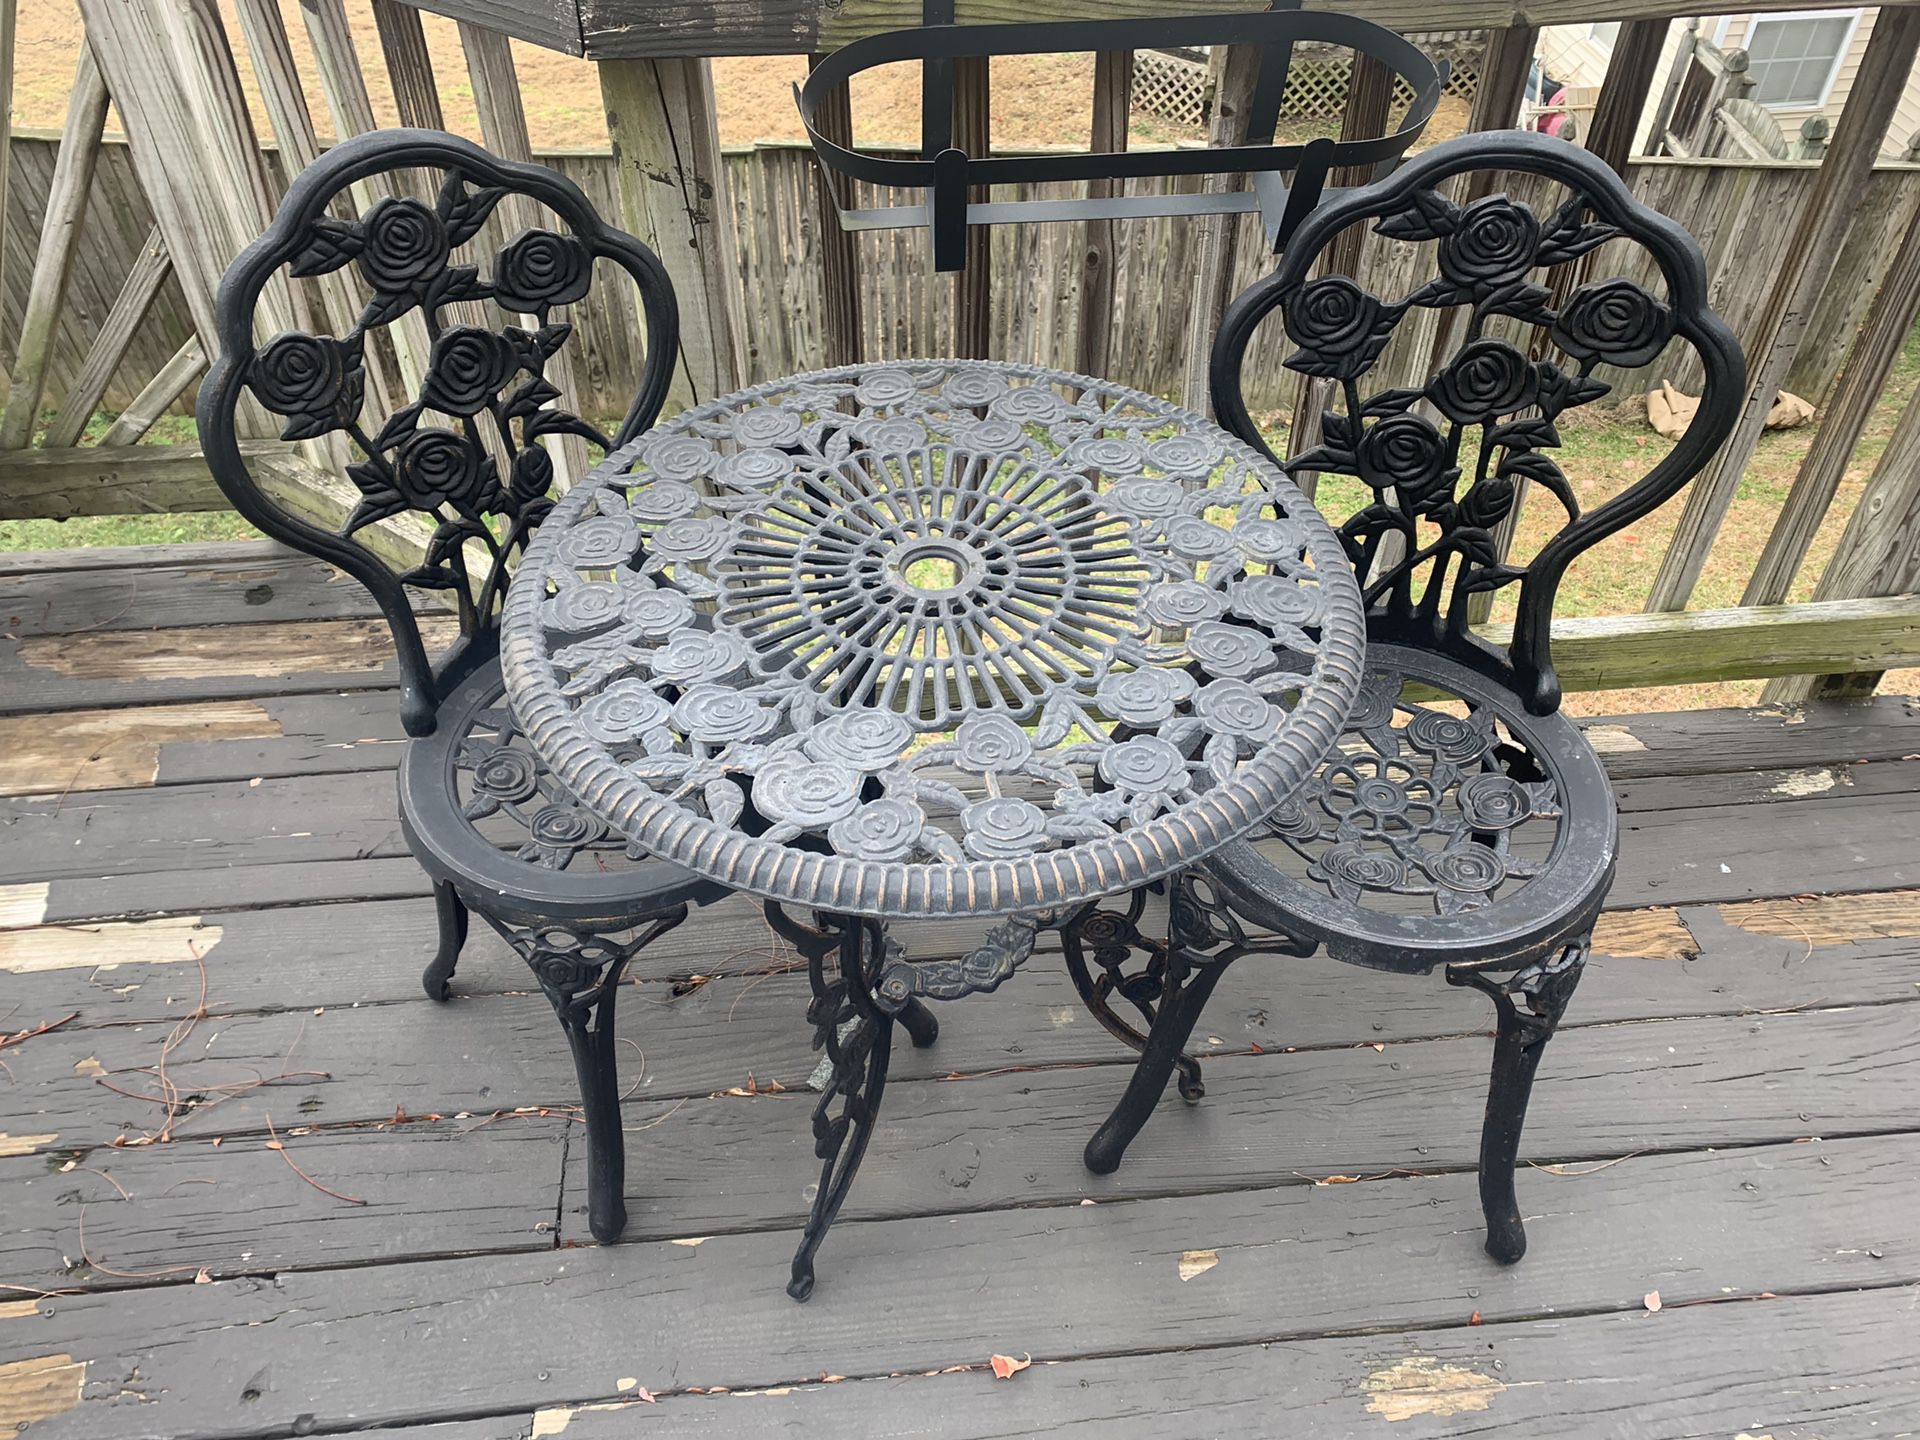 Small patio table and chairs